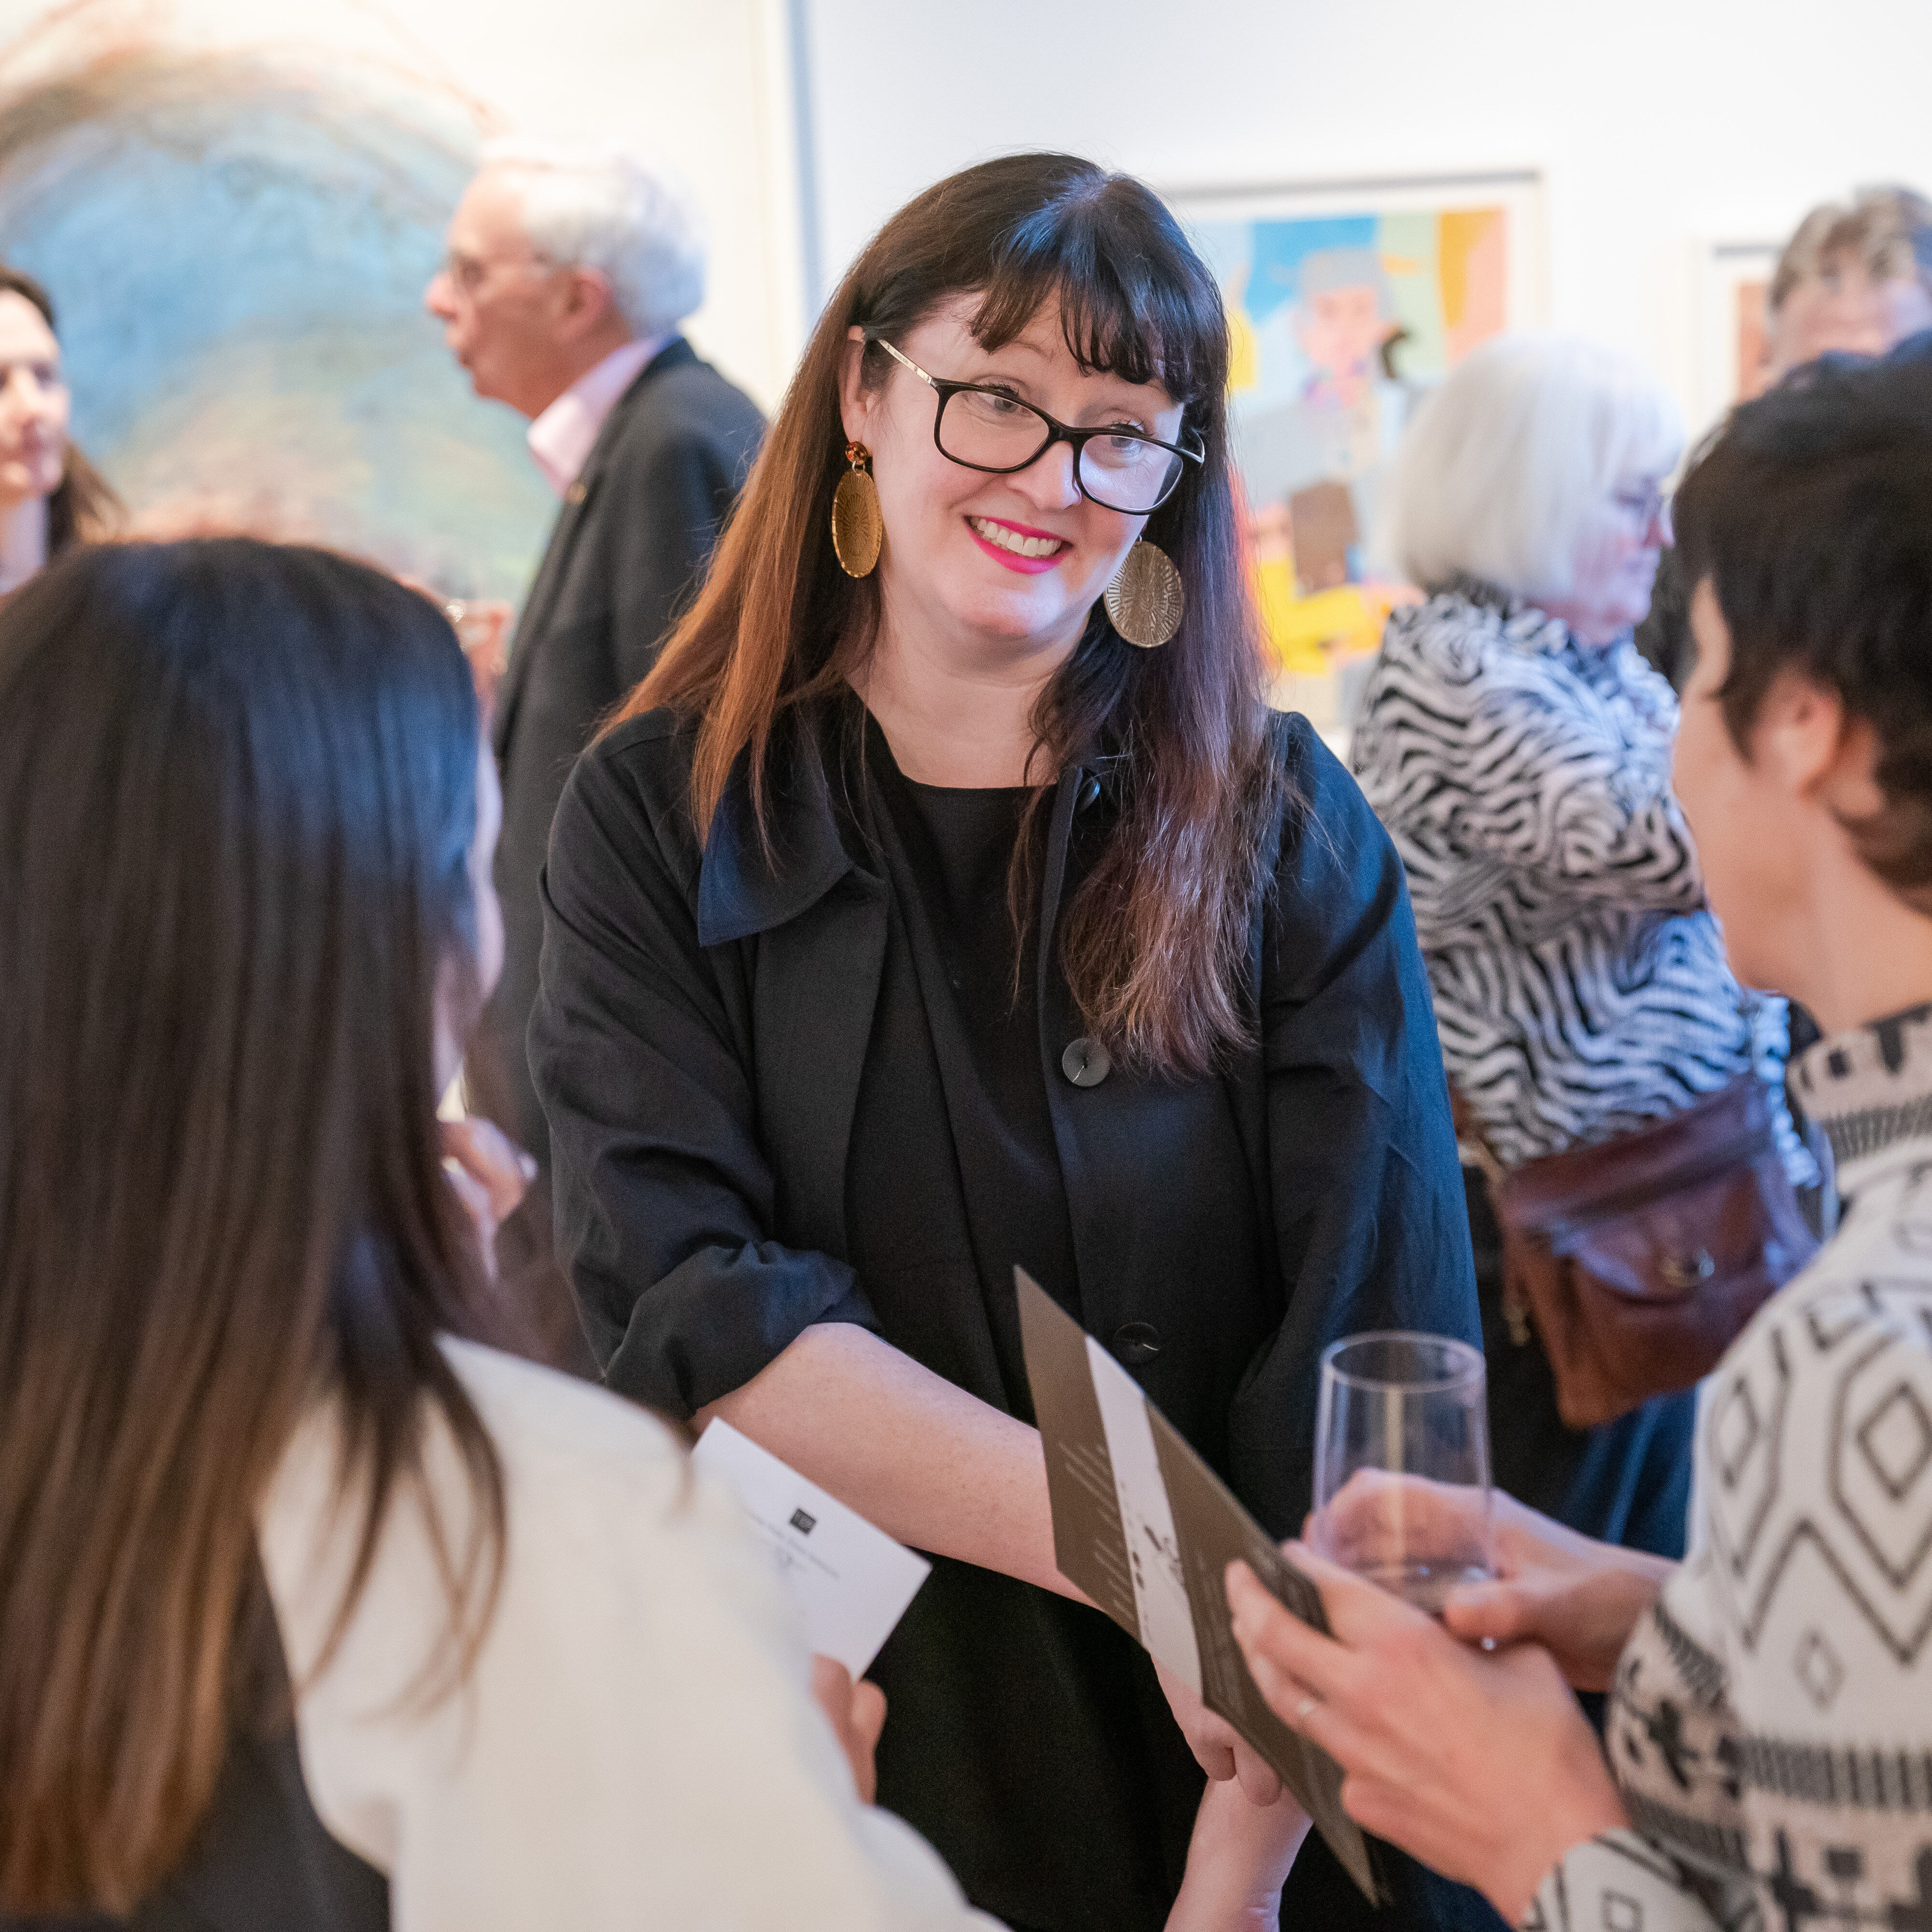 Three women standing and talking to one another, two are pictured from behind and a dark haired woman wearing glasses and a black dress is pictured in the centre. There are people standing in the background and appear out of focus. A number of artworks are on the wall in the background. Photo by James Gifford-Mead